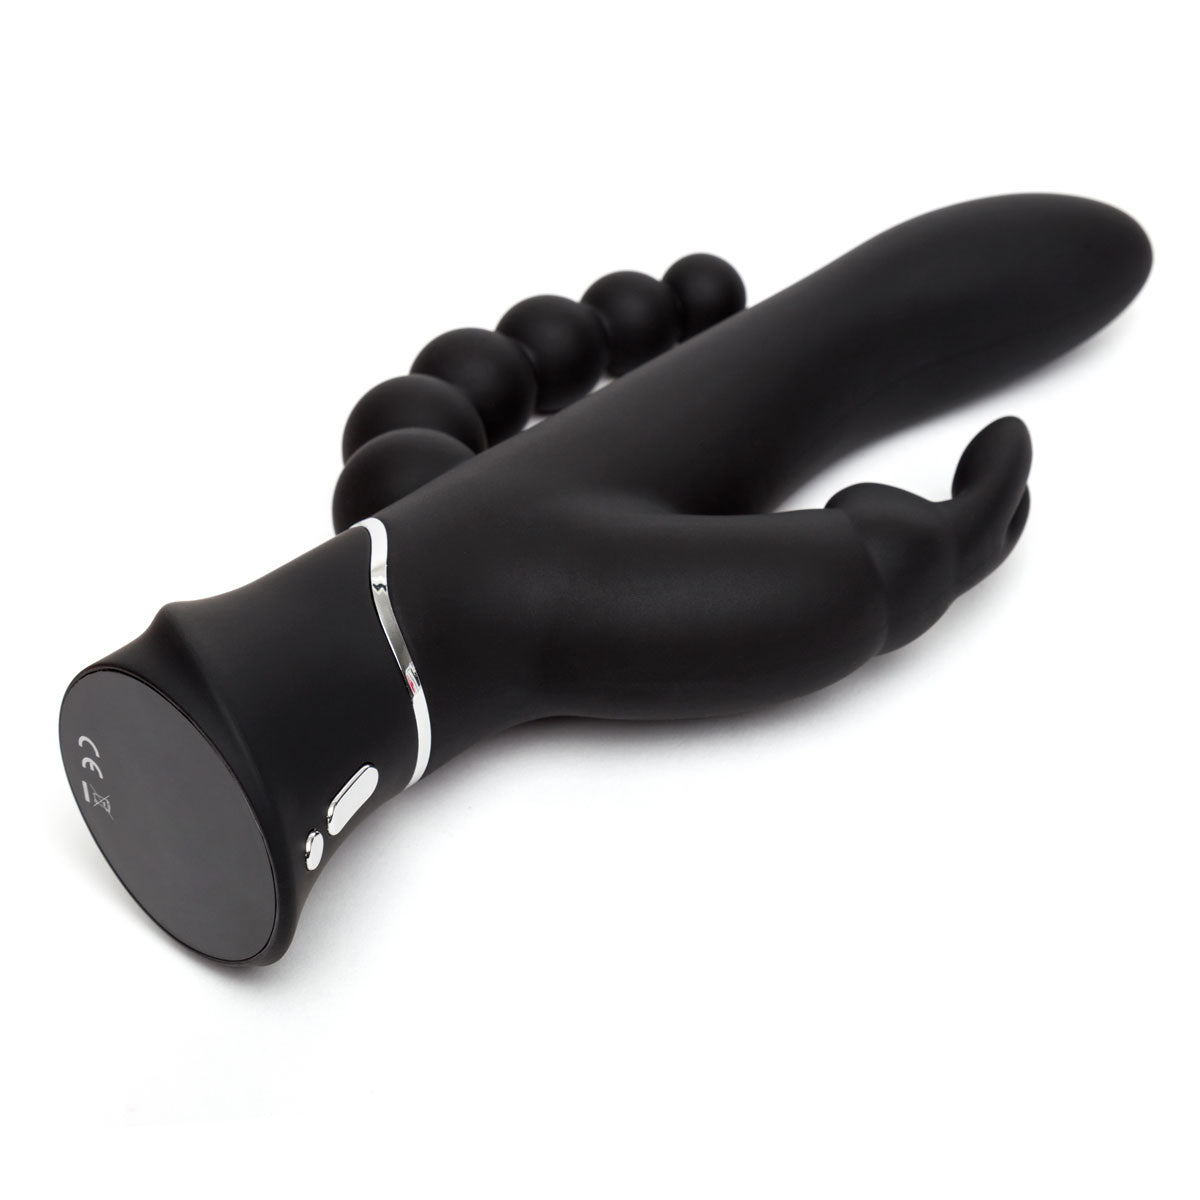 Happy Rabbit Elite Triple Curve Vibrator by Lovehoney - Black against a white background horizontal and showing the shaft, tickler, and anal beads